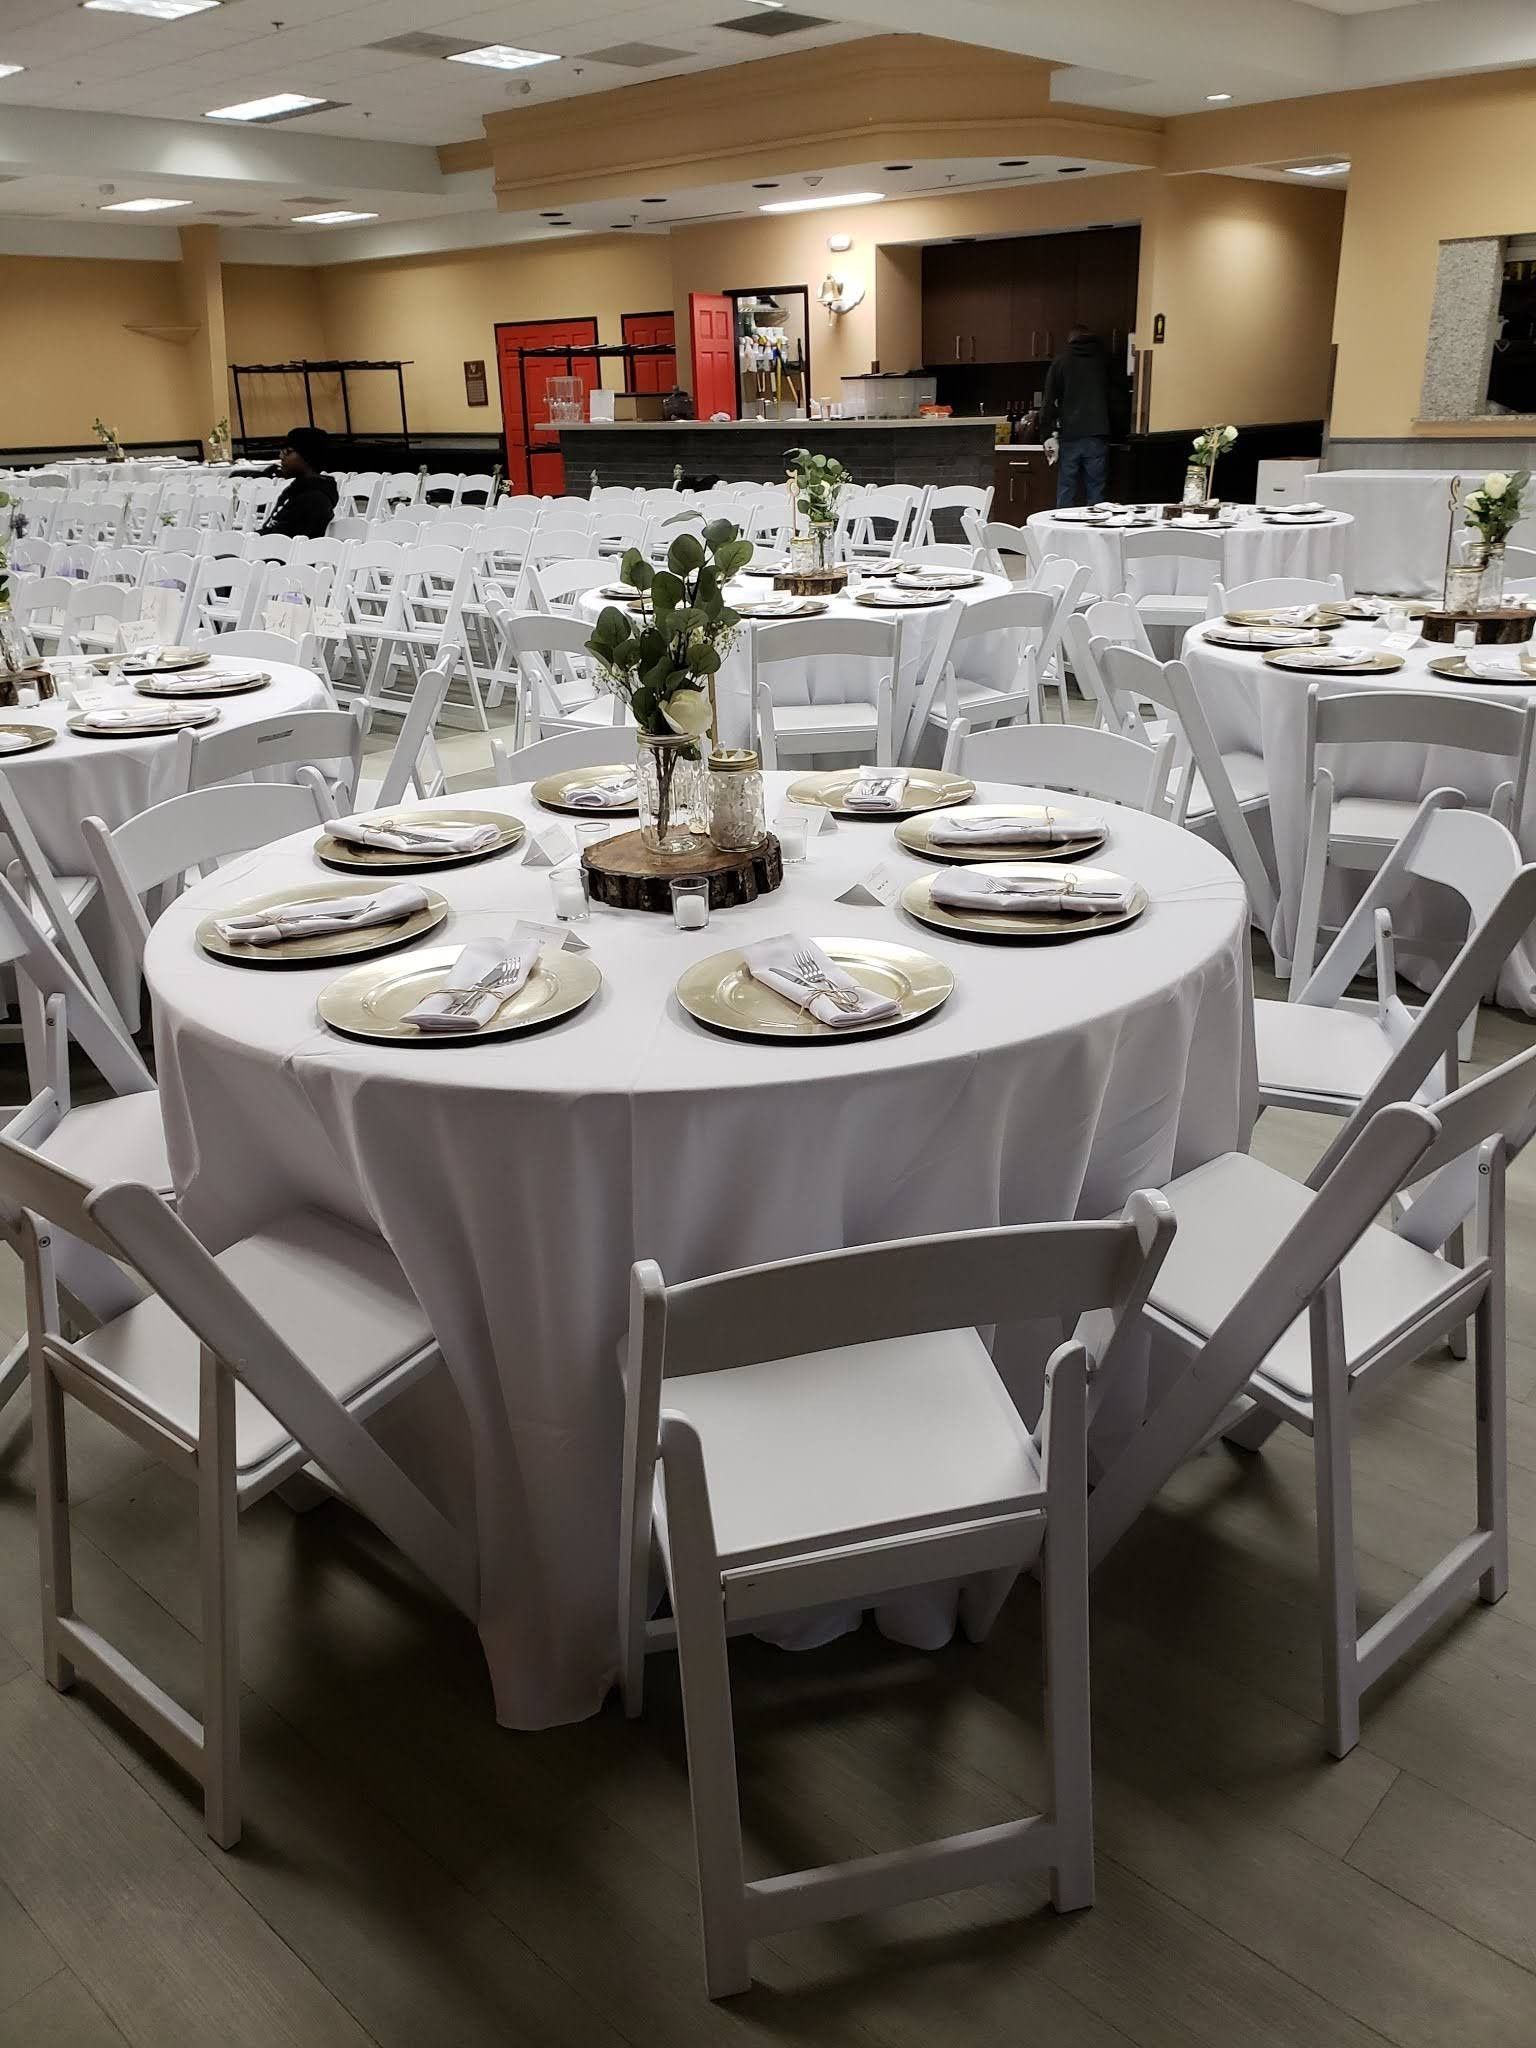 Wedding Table Decor - 14 Tables - Silverware included